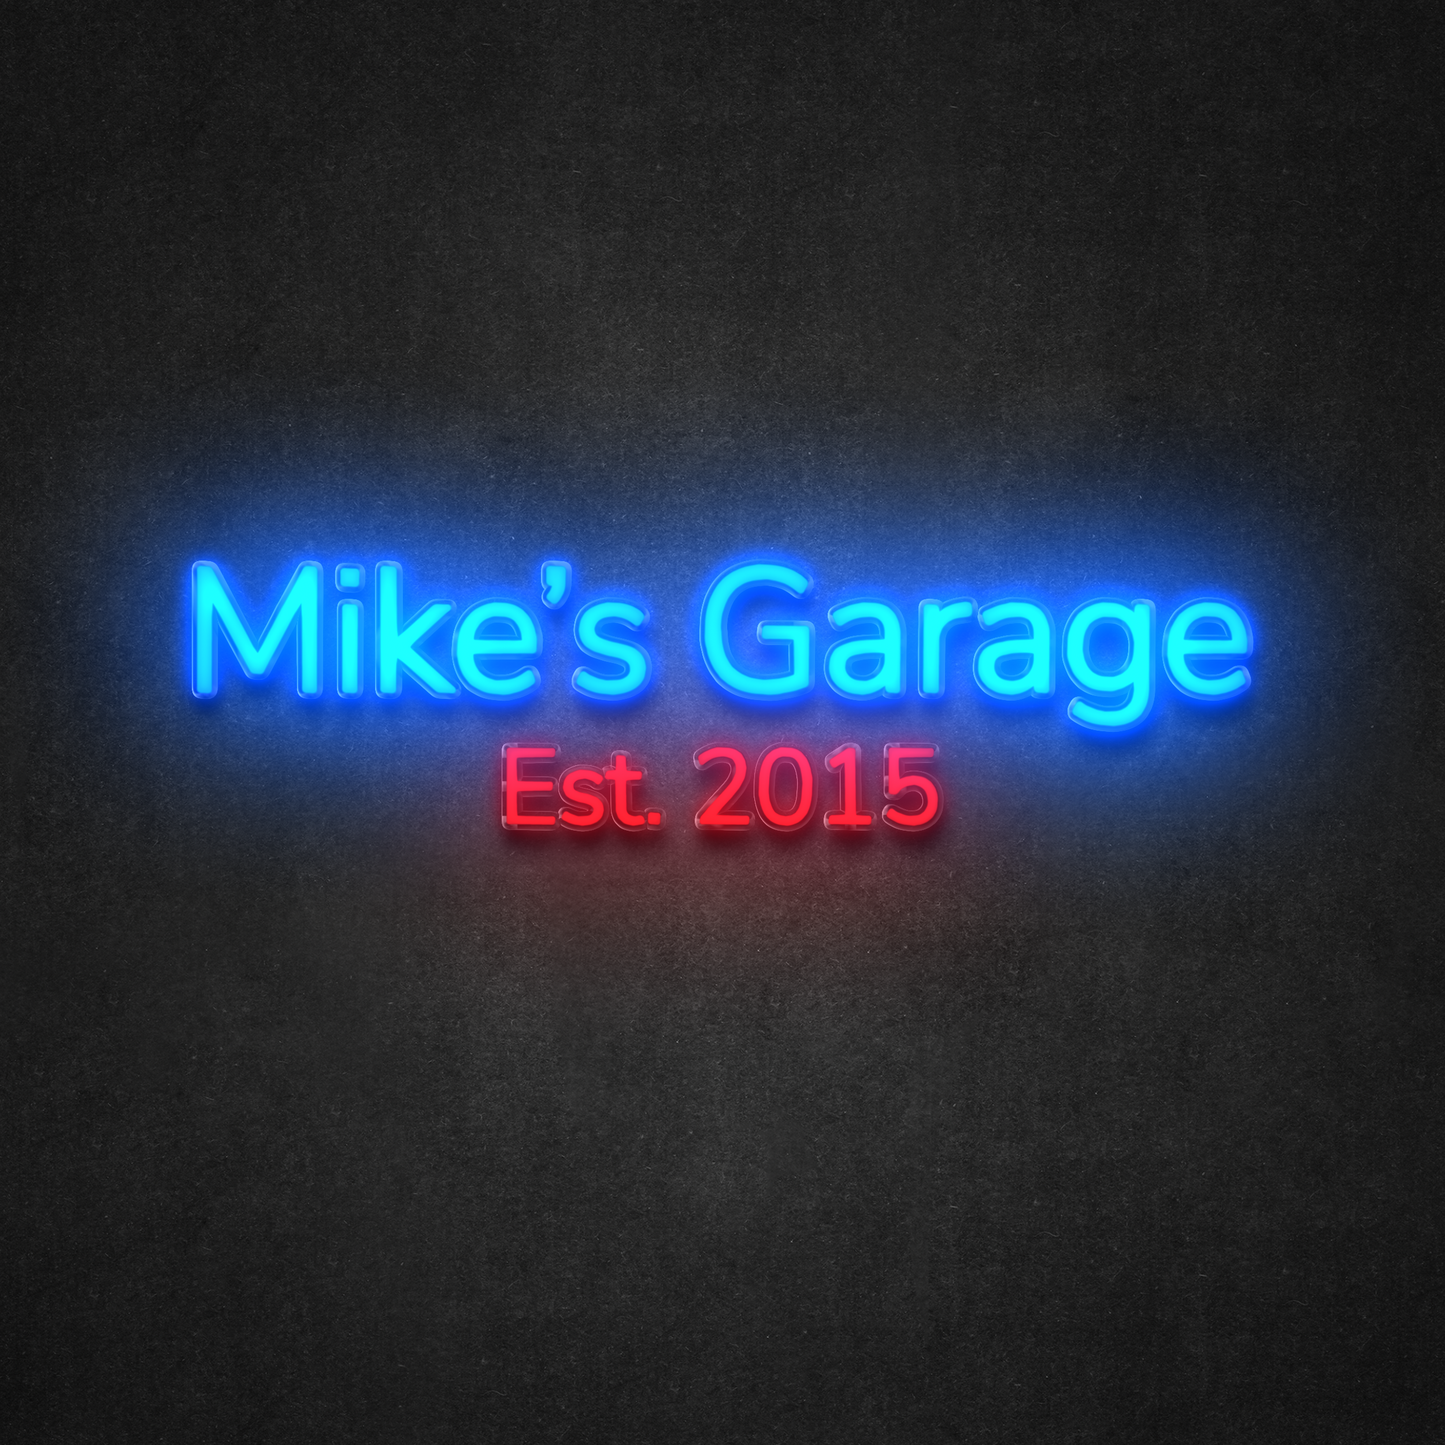 Personalized LED Neon Garage Sign w/ Est. Date